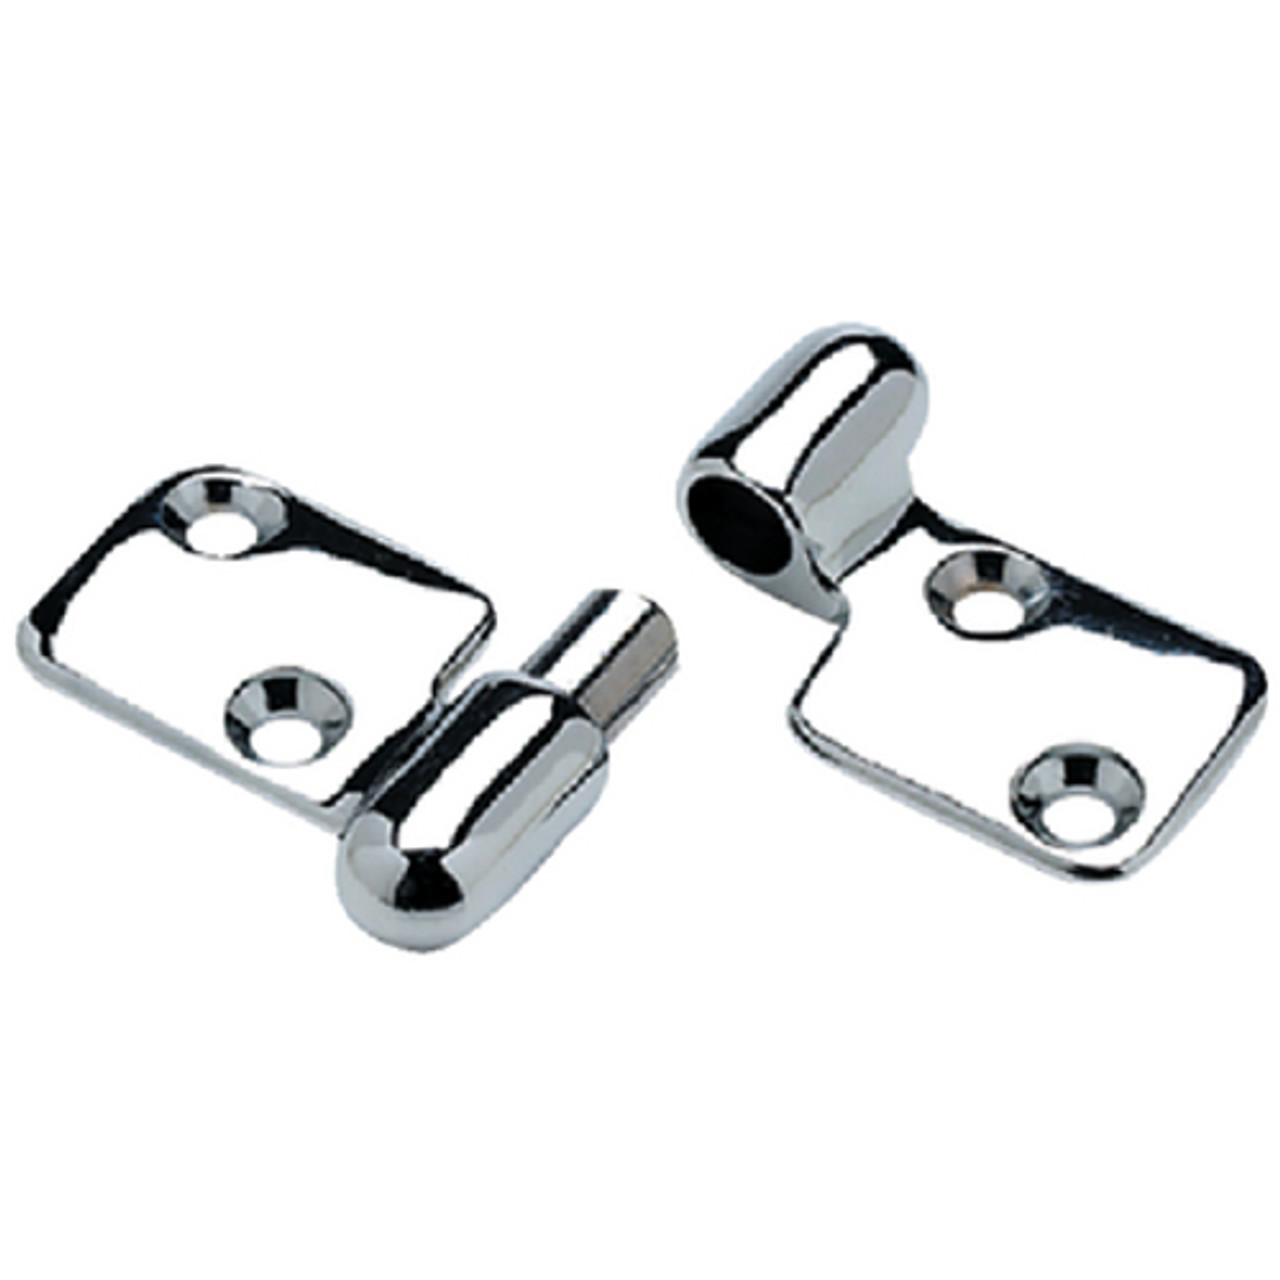 Chrome Plated Brass Take Apart Motor Box Hinge for Boats